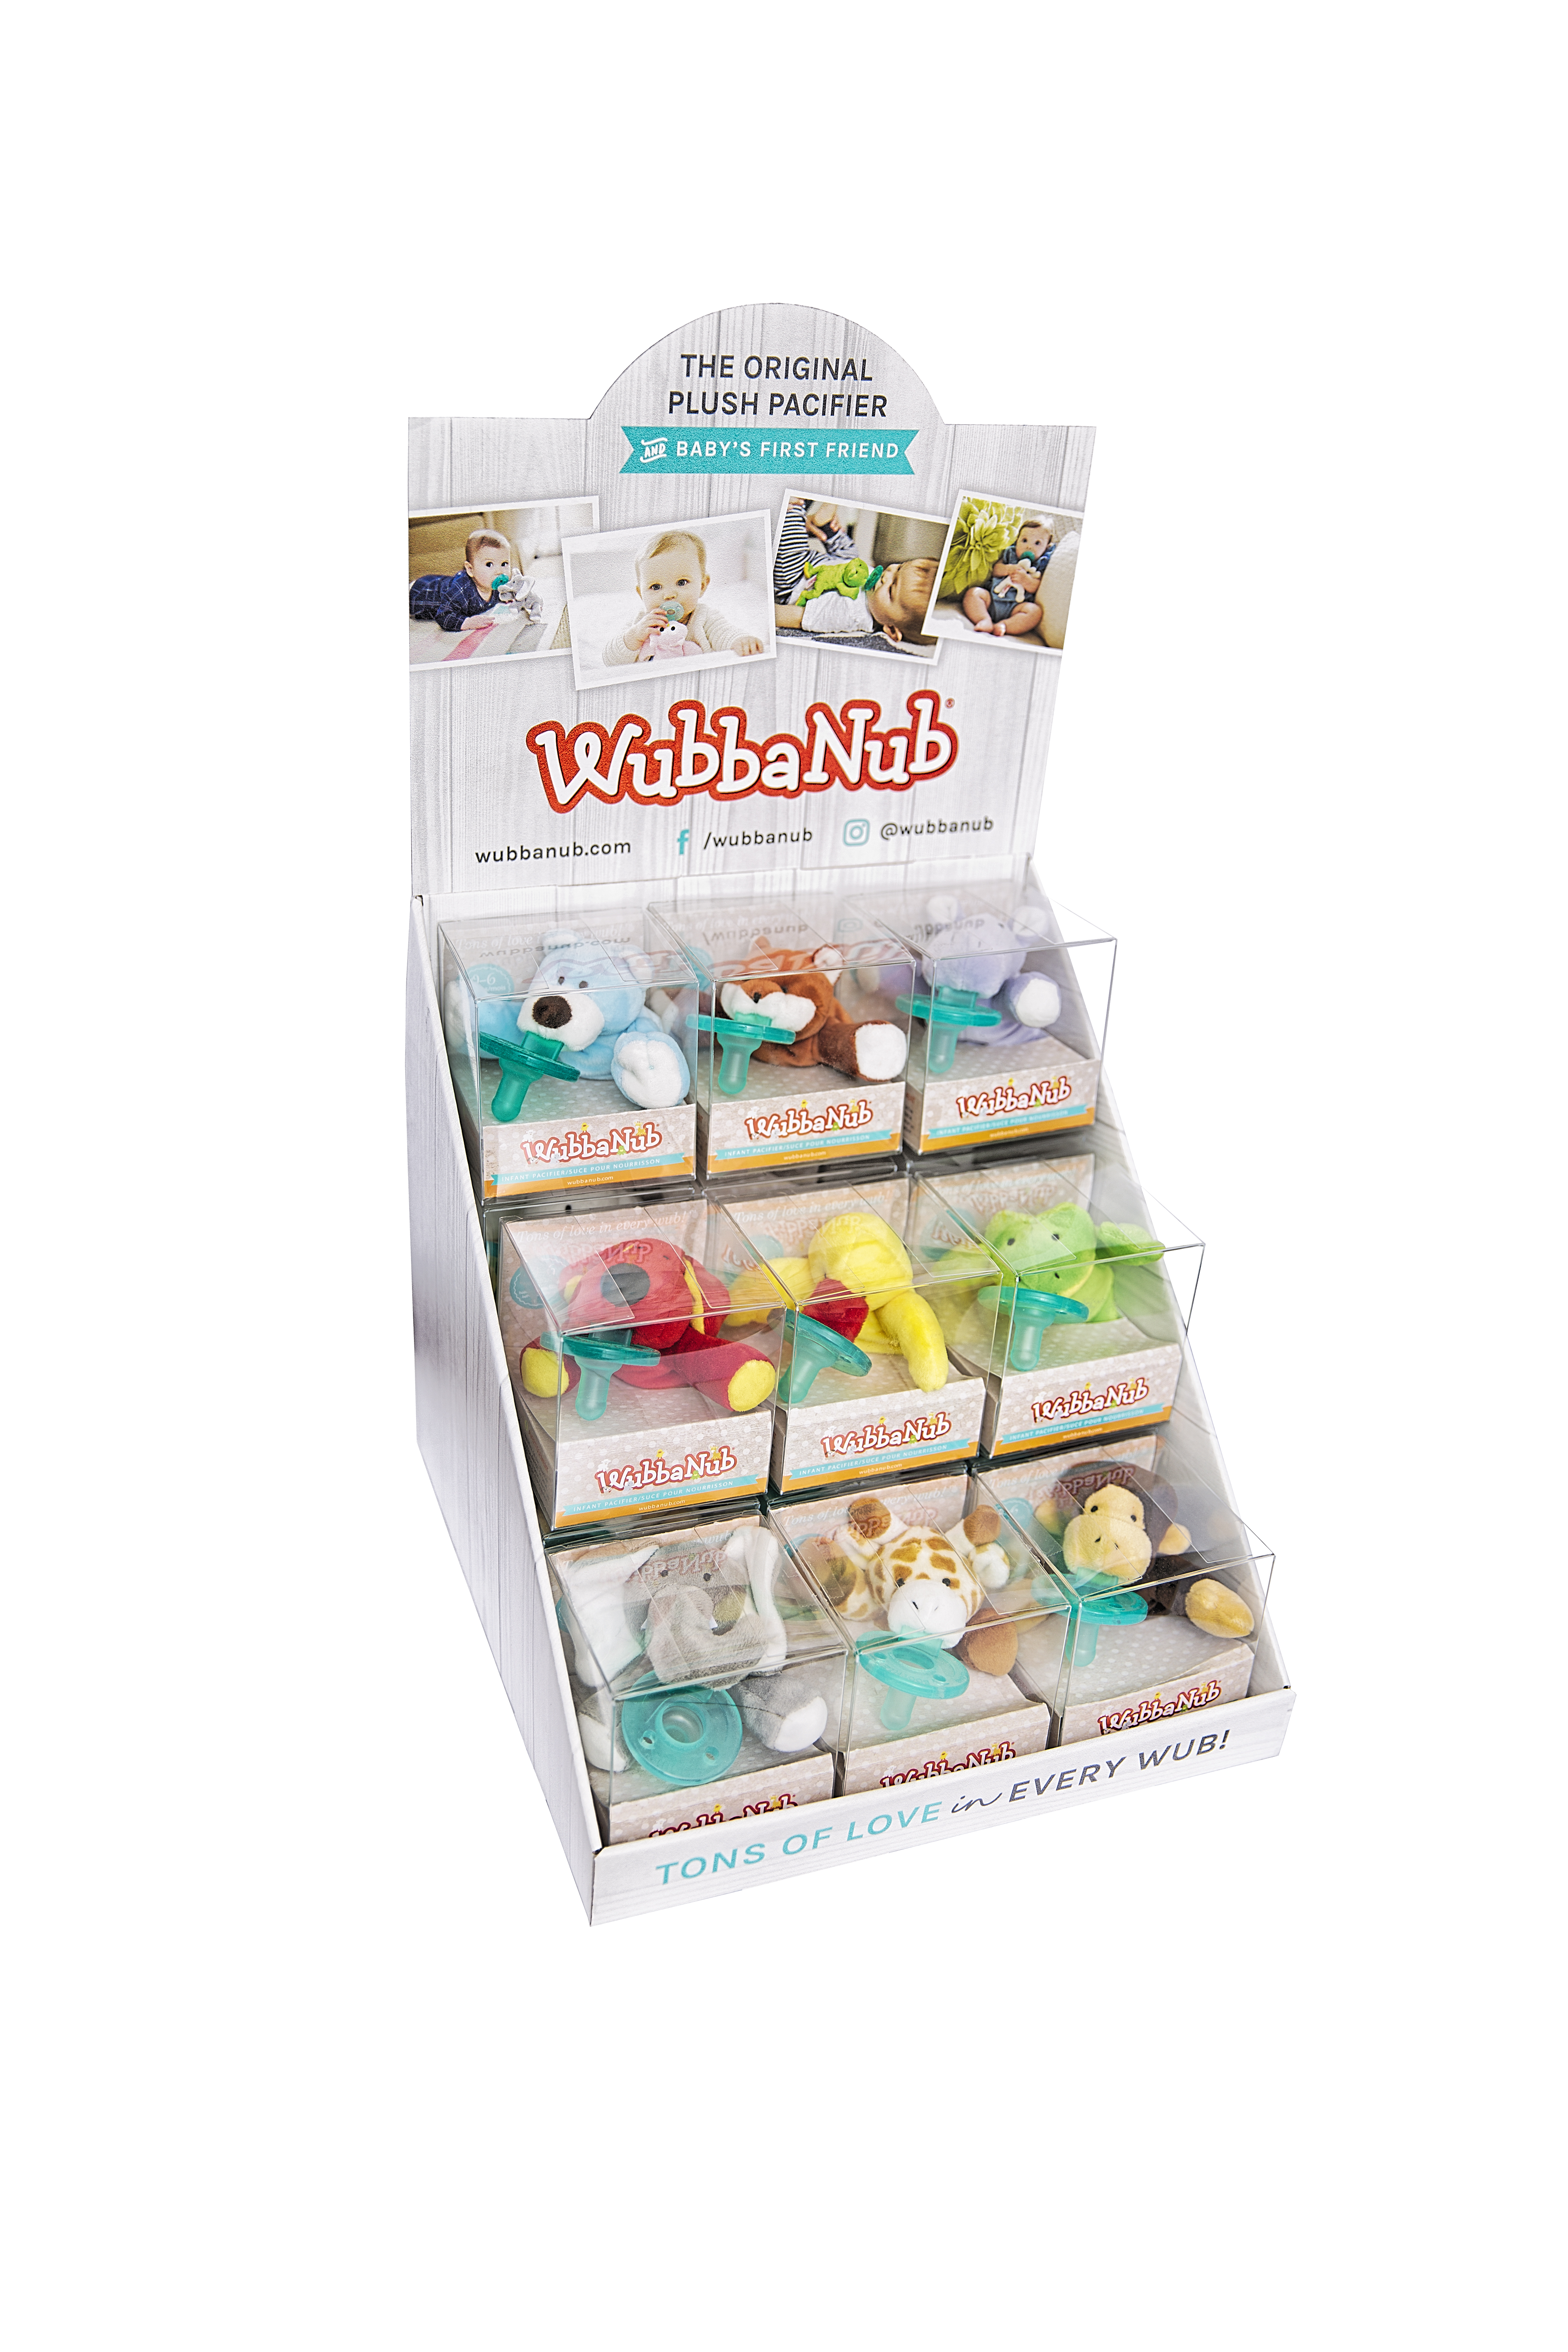 Point-of-Sale with Product - WubbaNub